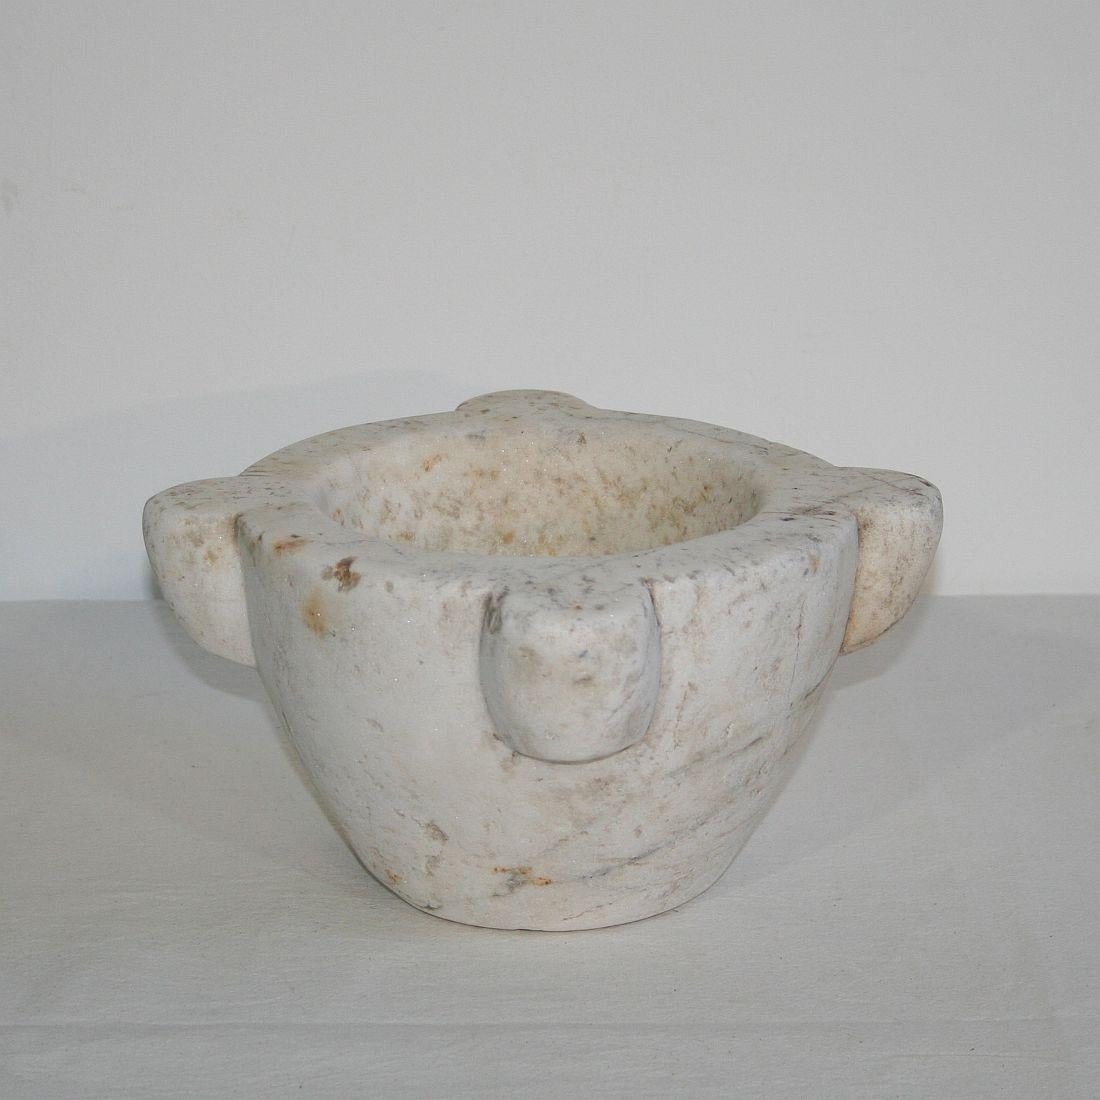 Primitive French white marble mortar, France, 18th century. Weathered.